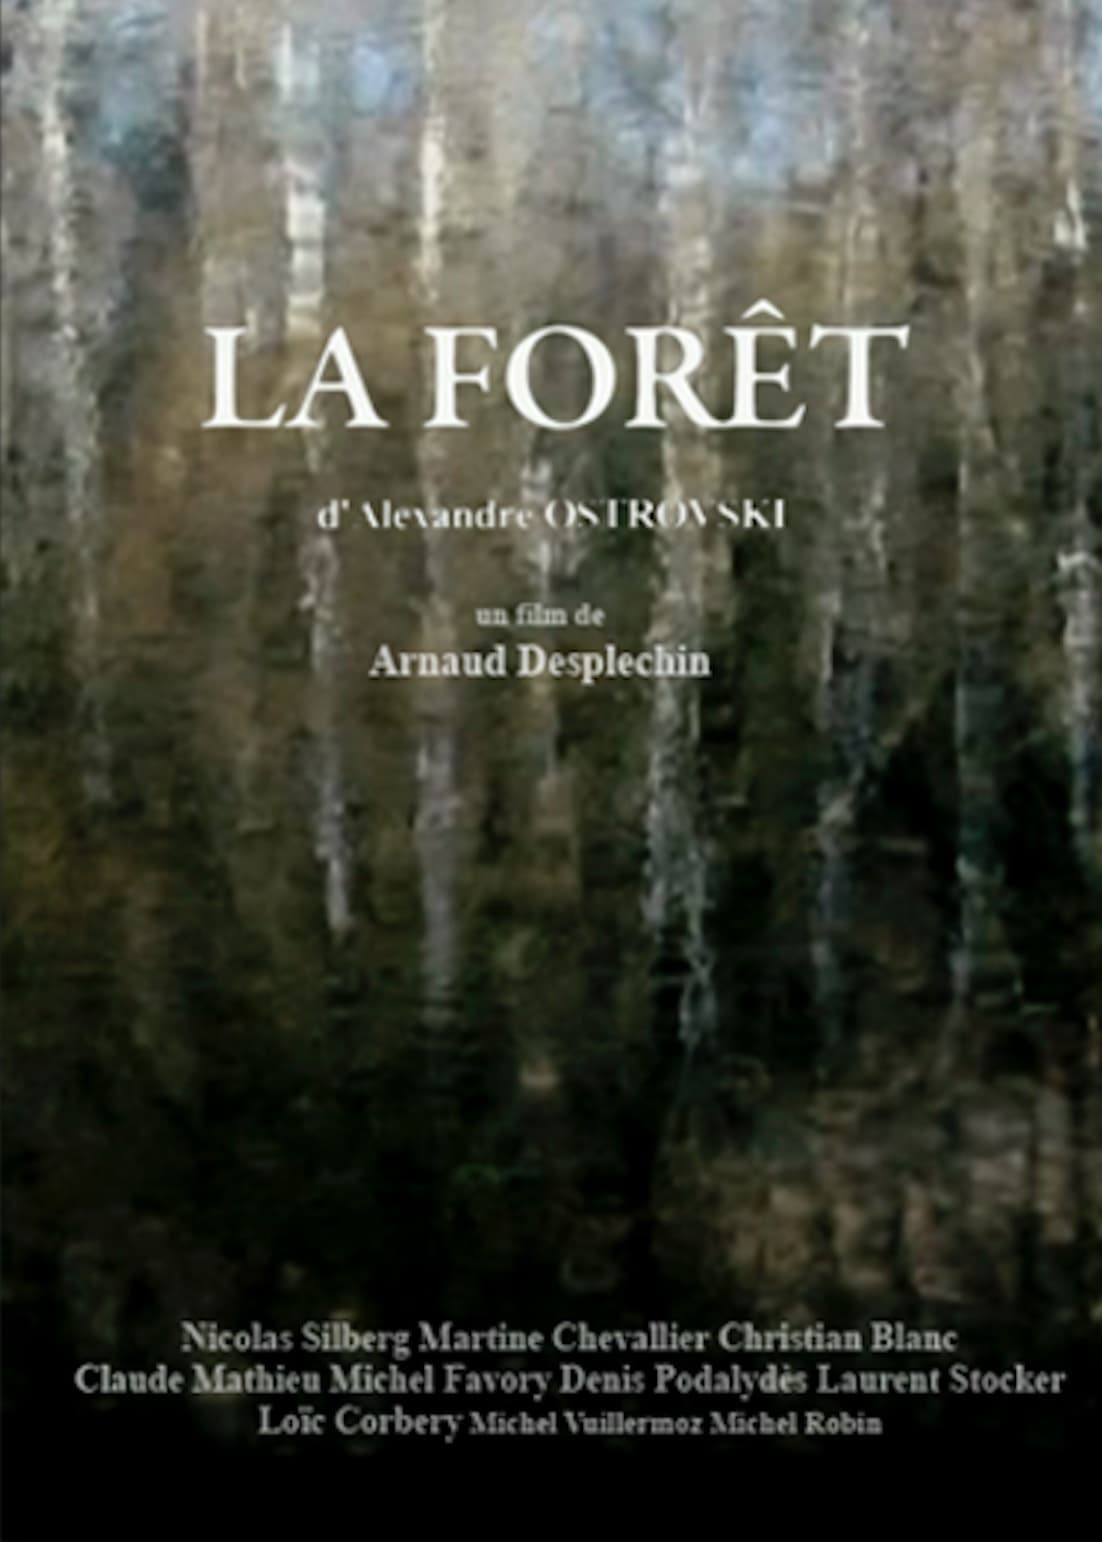 The Forest (2014)